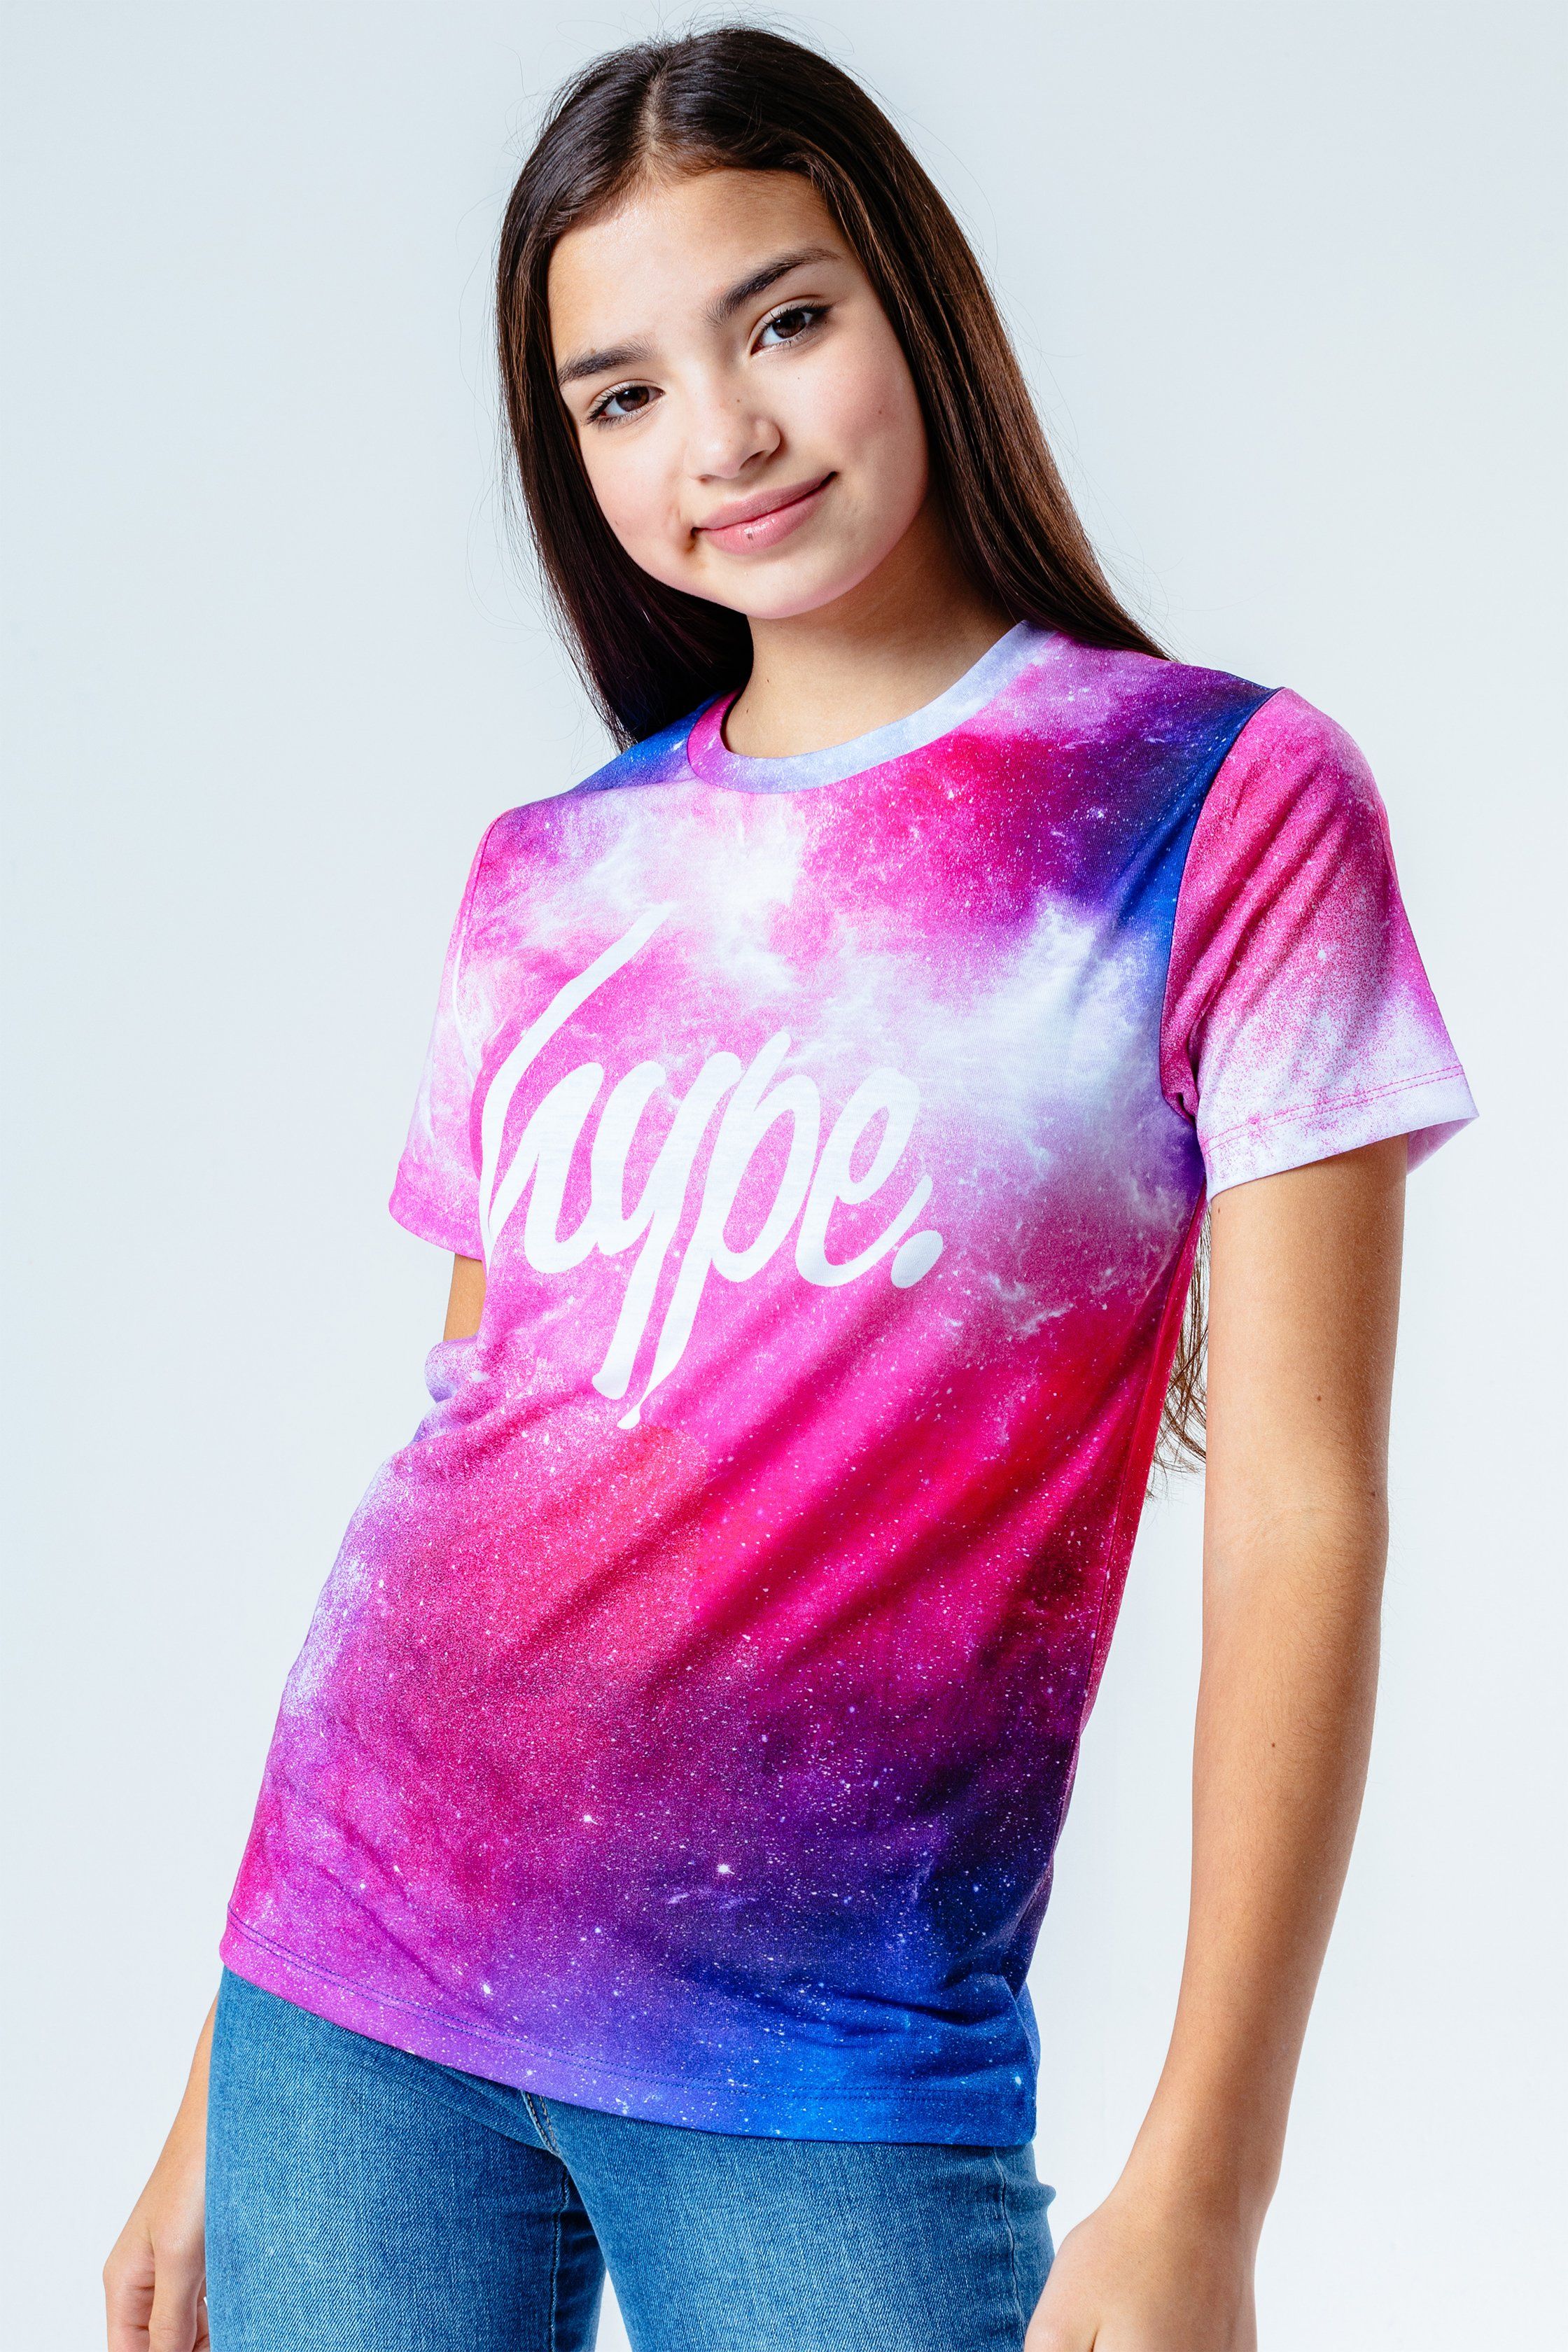 The HYPE. Pink System Kids T-Shirt features a purple, pink and white colour palette. In our standard kids tee shape in a 95% polyester and 5% elastane fabric base for the ultimate comfort. Finished with a crew neckline and short sleeves with the iconic HYPE. script logo in a contrasting white on the front. The design features a galaxy and galactic inspired all over print. Wear with black denim jeans to complete the look. Machine wash at 30 degrees.